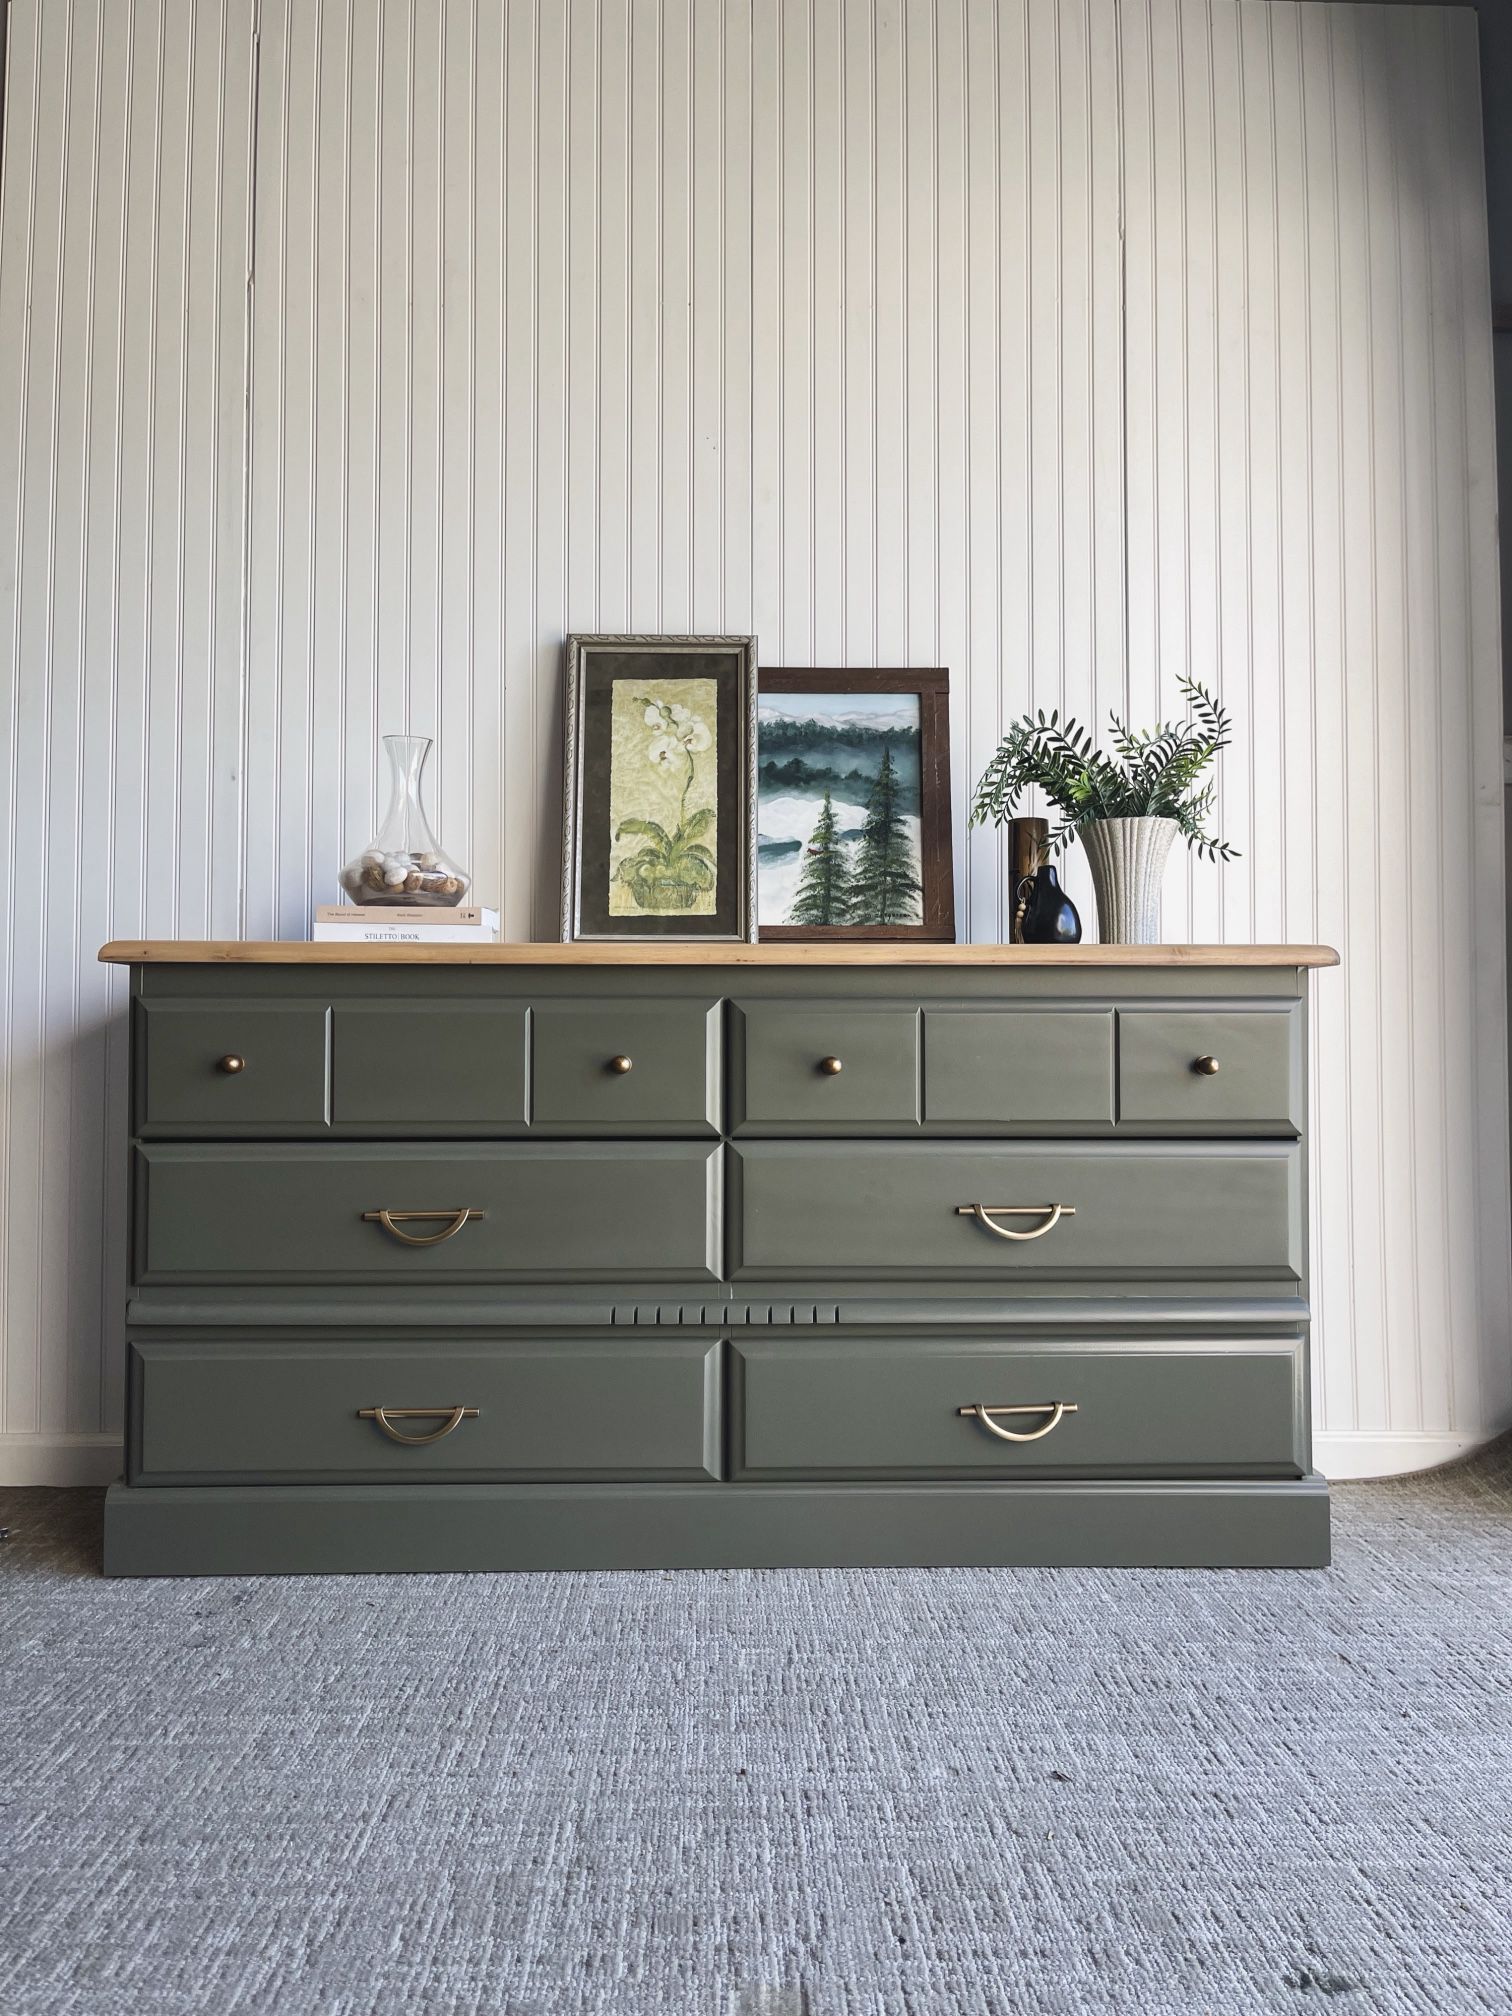 Olive Dresser with Natural Wood Finish!